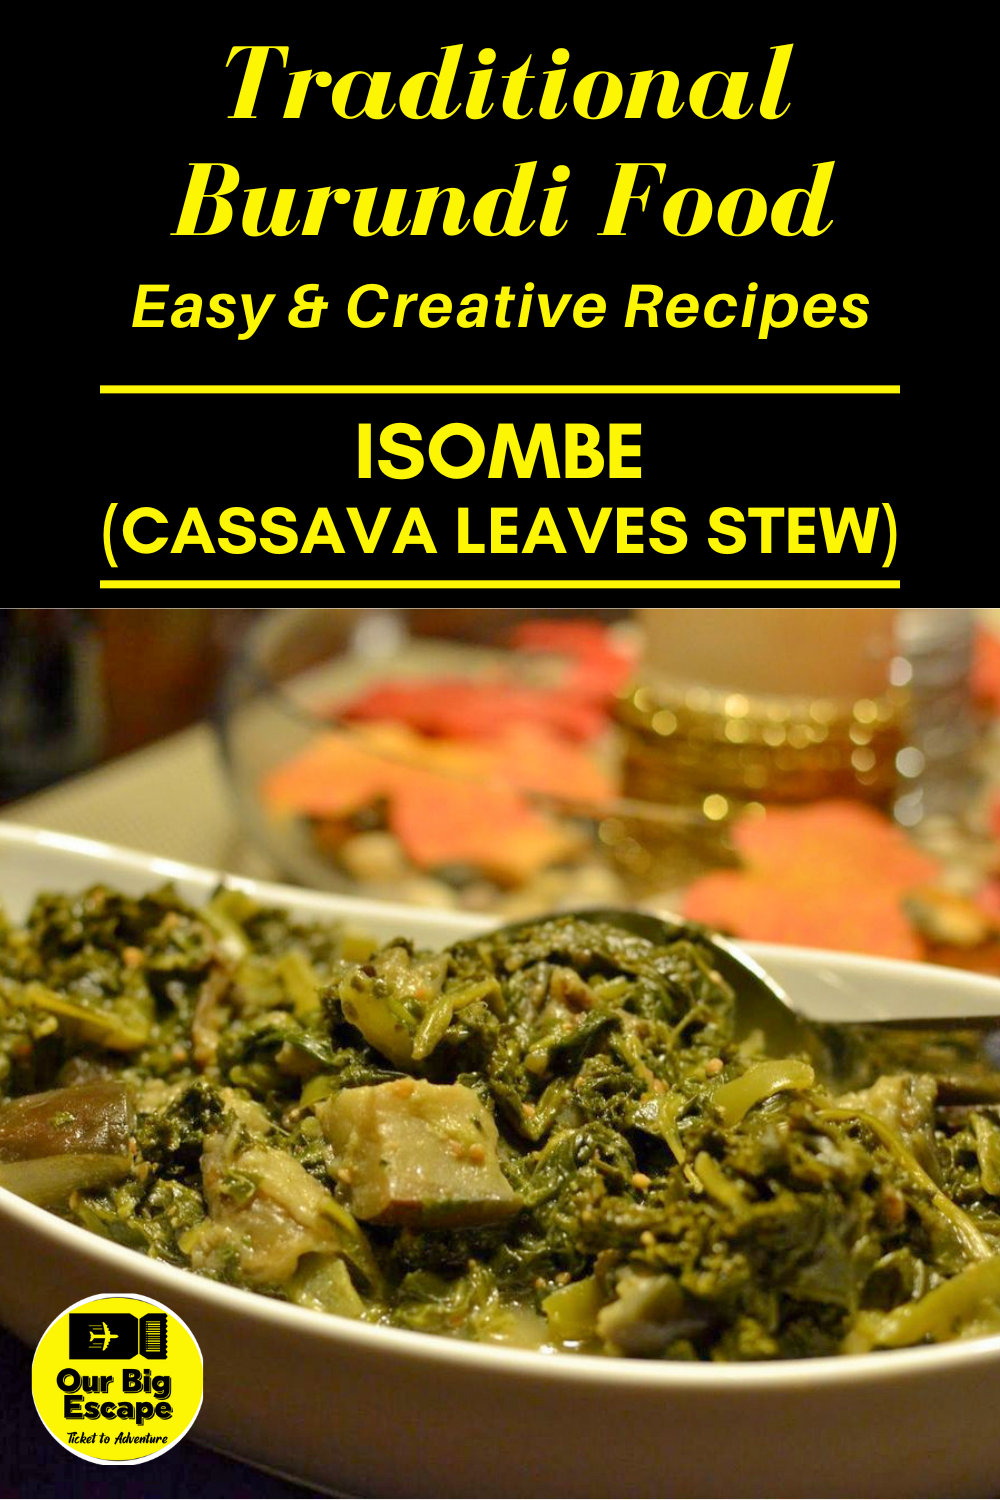 Isombe (Cassava Leaves Stew) - 13 Traditional Burundi Food Choices With Easy & Creative Recipes